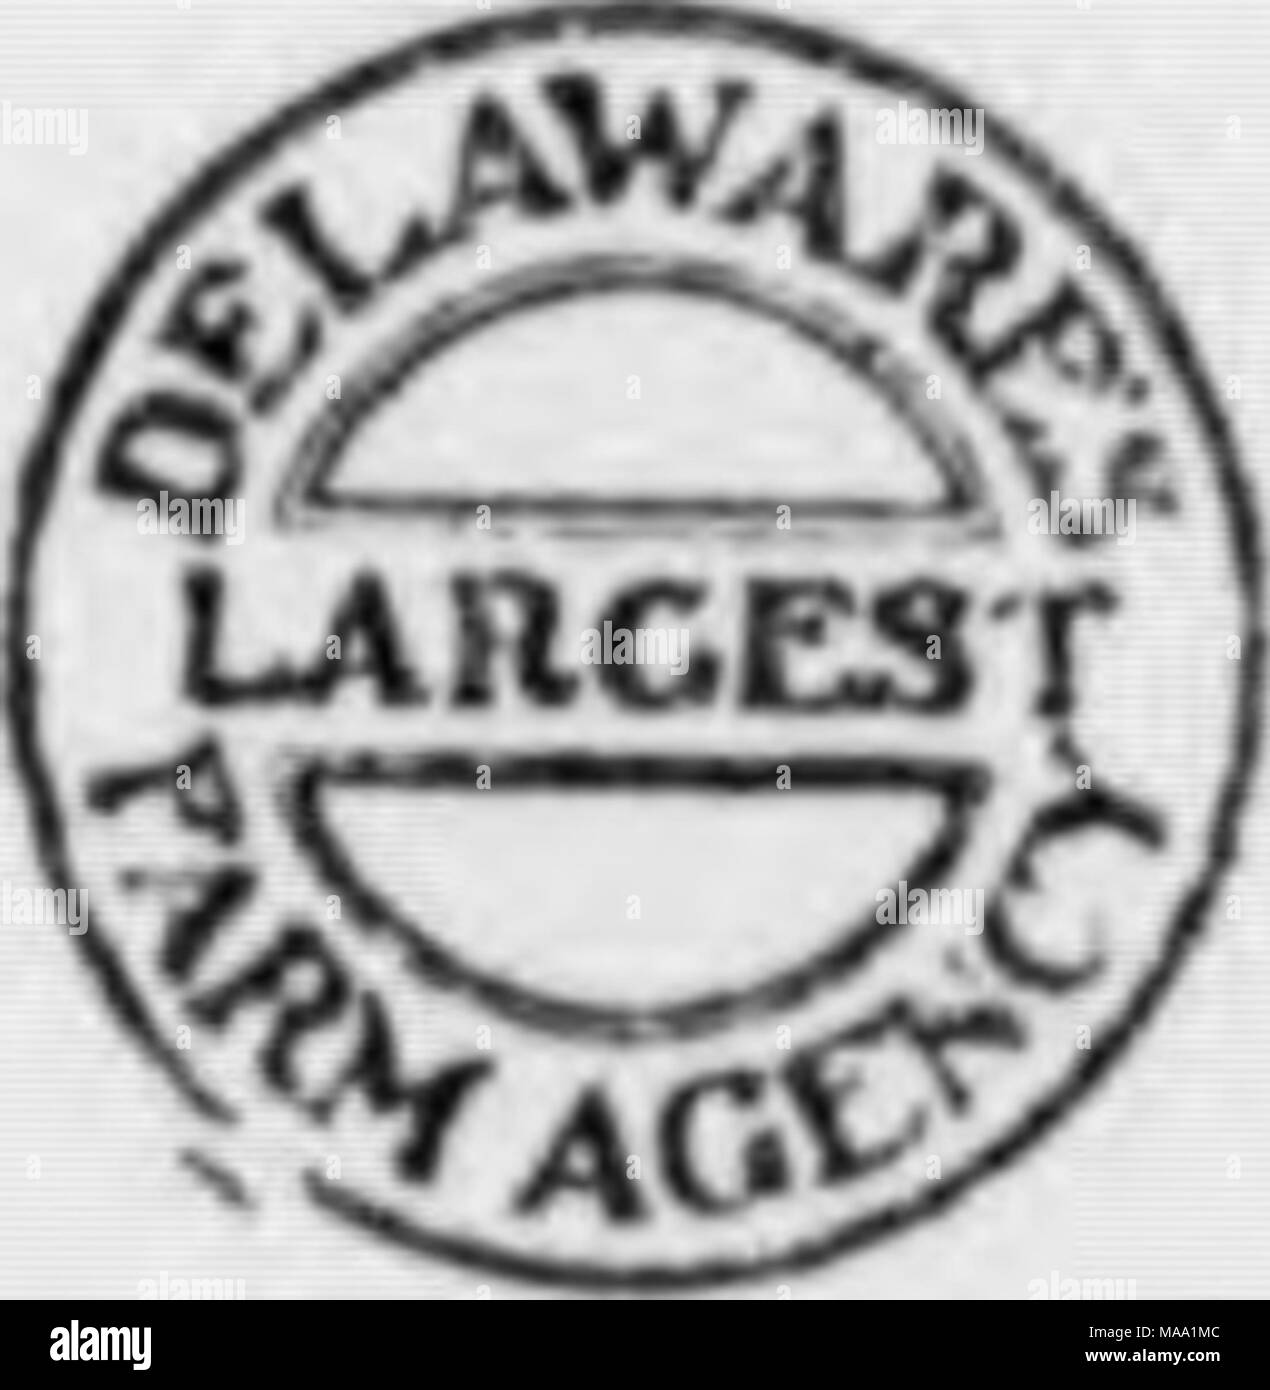 . Eastern fruit . HÂ» YOU I A Trill k Fiiriii. A Fruit WANT X I'otiltry Farm, A l&gt;airy Delaware's Larg- est Farm Agency can put you nextâ our 1912 Farm Cat- alogue describe.-* them. Tells which are best adapted to your needs â price per acreâll.'i up- wards, etc., etc. Del- aware farnier.s have advantages not enjoyed by Western an Si. ItFIS. Iiie. I)f|Â»t. .IH. Wilmington. I&gt;l. FARMS BOUGHT. SOLD AND EX- â¢ 'ILANC.KD. No matter when- located. Write (&quot;has. A. Phildius, 3SS I'leasant ave- nue, New Vnrk. fruiting upon the grounds in three or four years. One tree is of particular inter Stock Photo